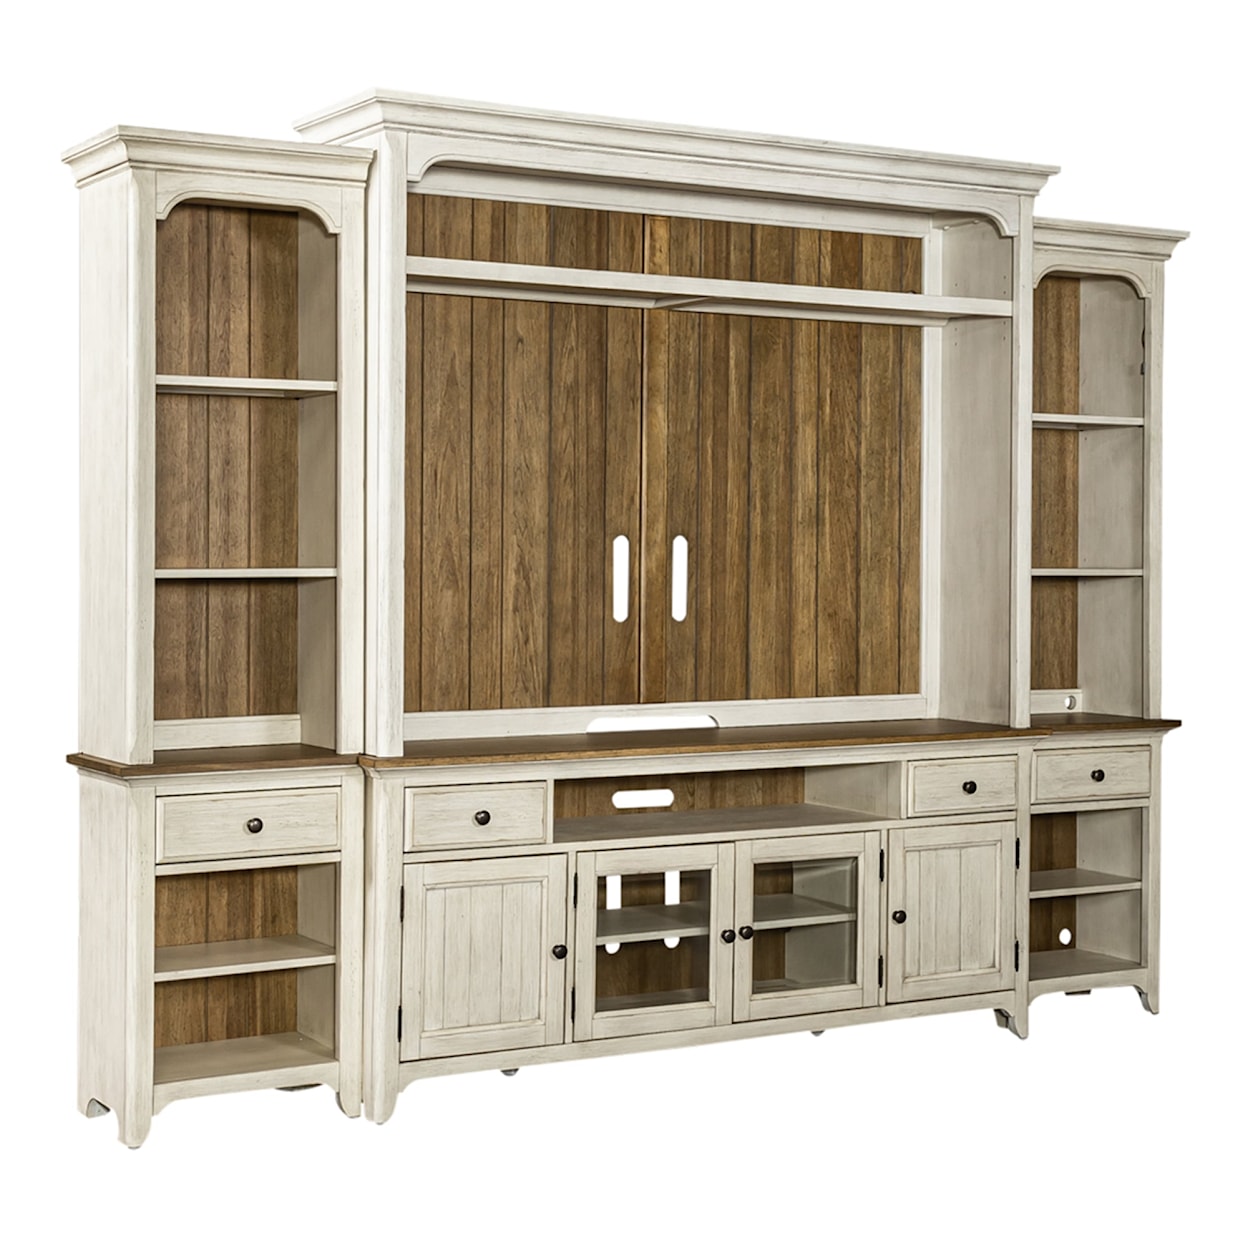 Libby Farmhouse Reimagined Entertainment Center with Piers